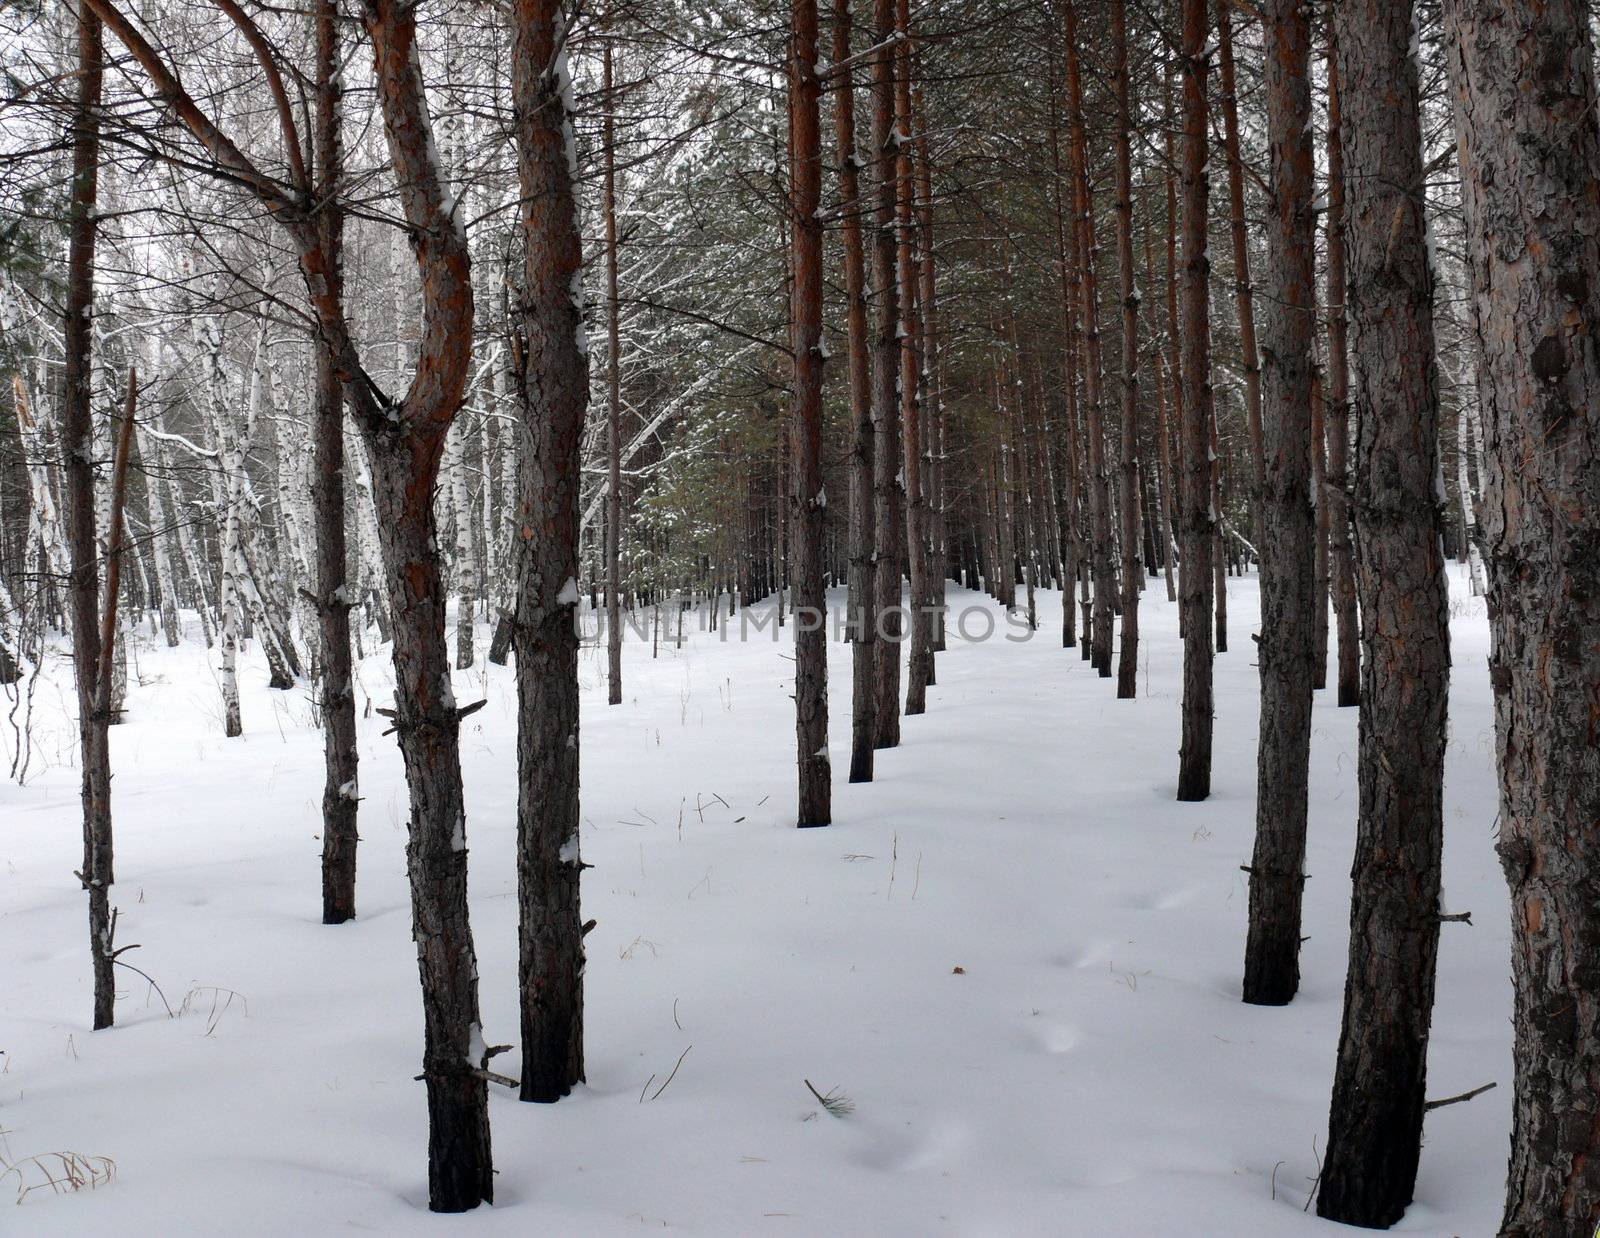 rows of pine-trees in winter forest by Stoyanov